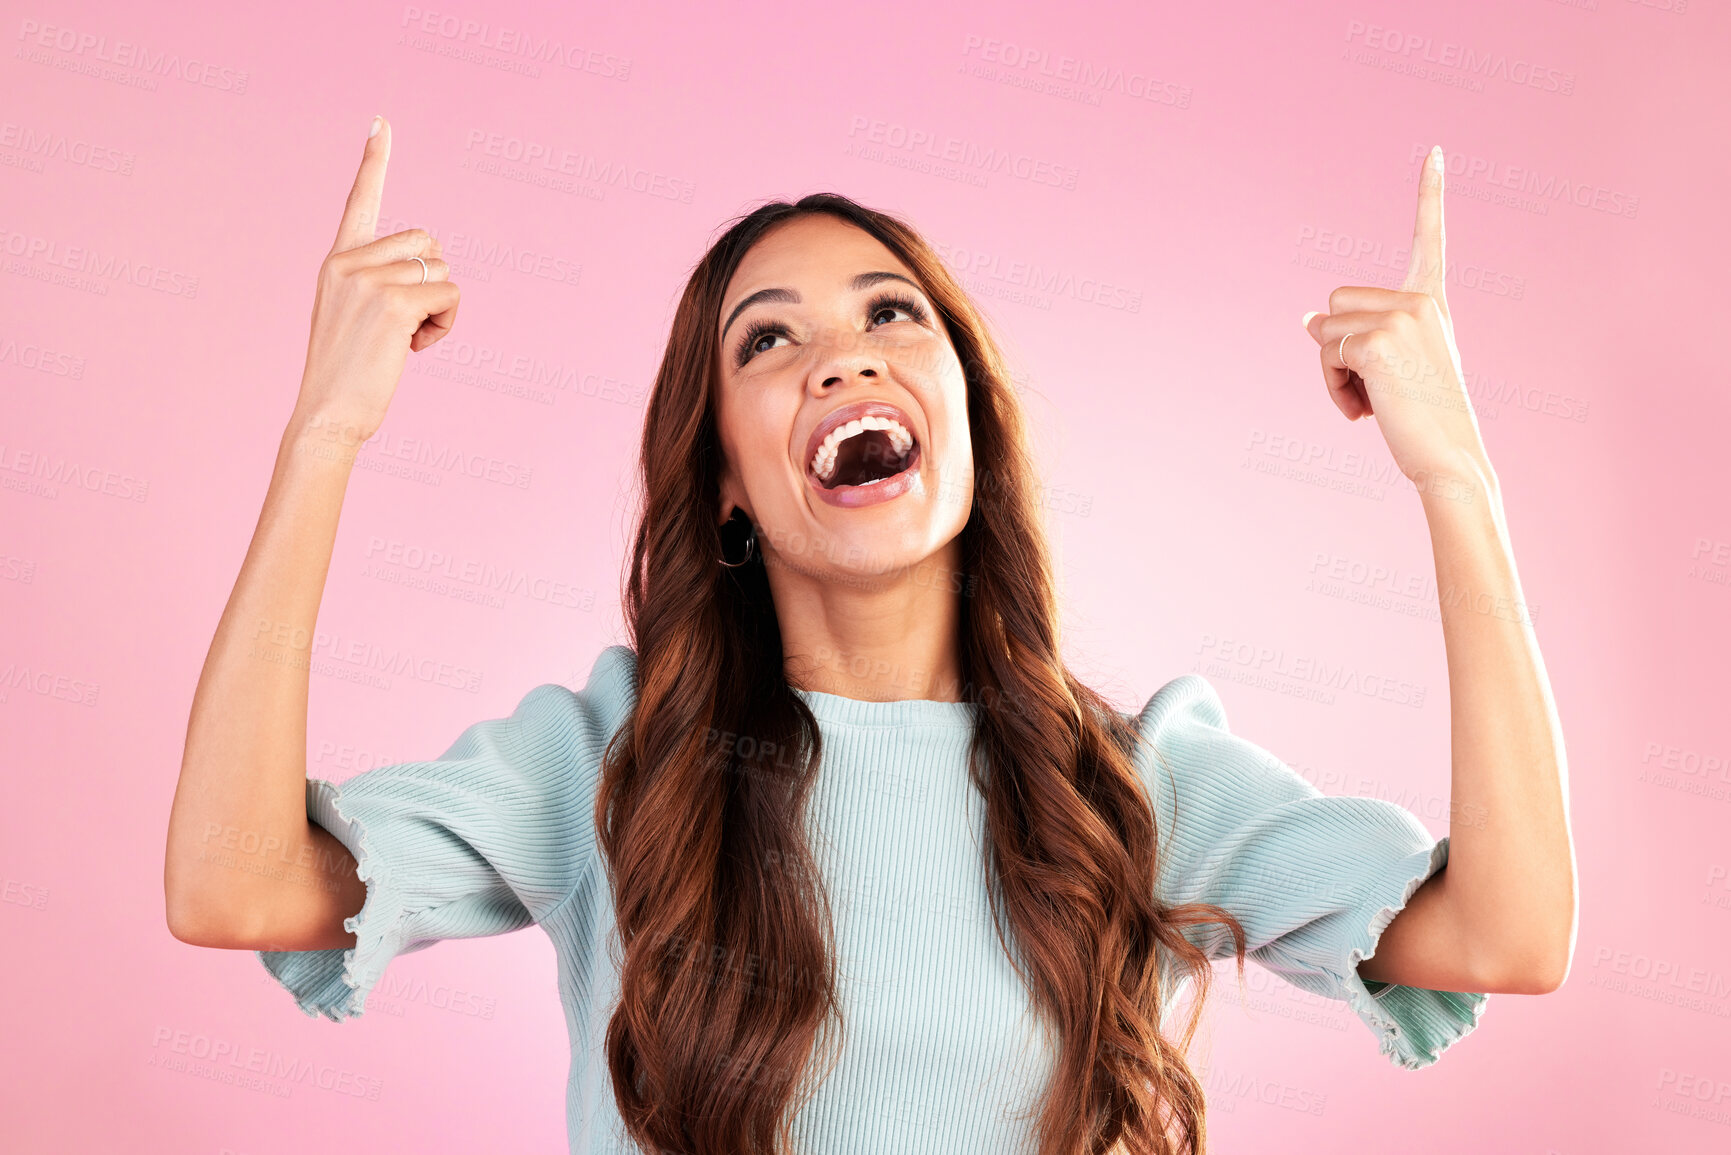 Buy stock photo Pointing, mockup and woman on pink background with happy, smile and excited for sale, deal or discount news. Advertising, hands and girl looking up for product placement, promotion and announcement